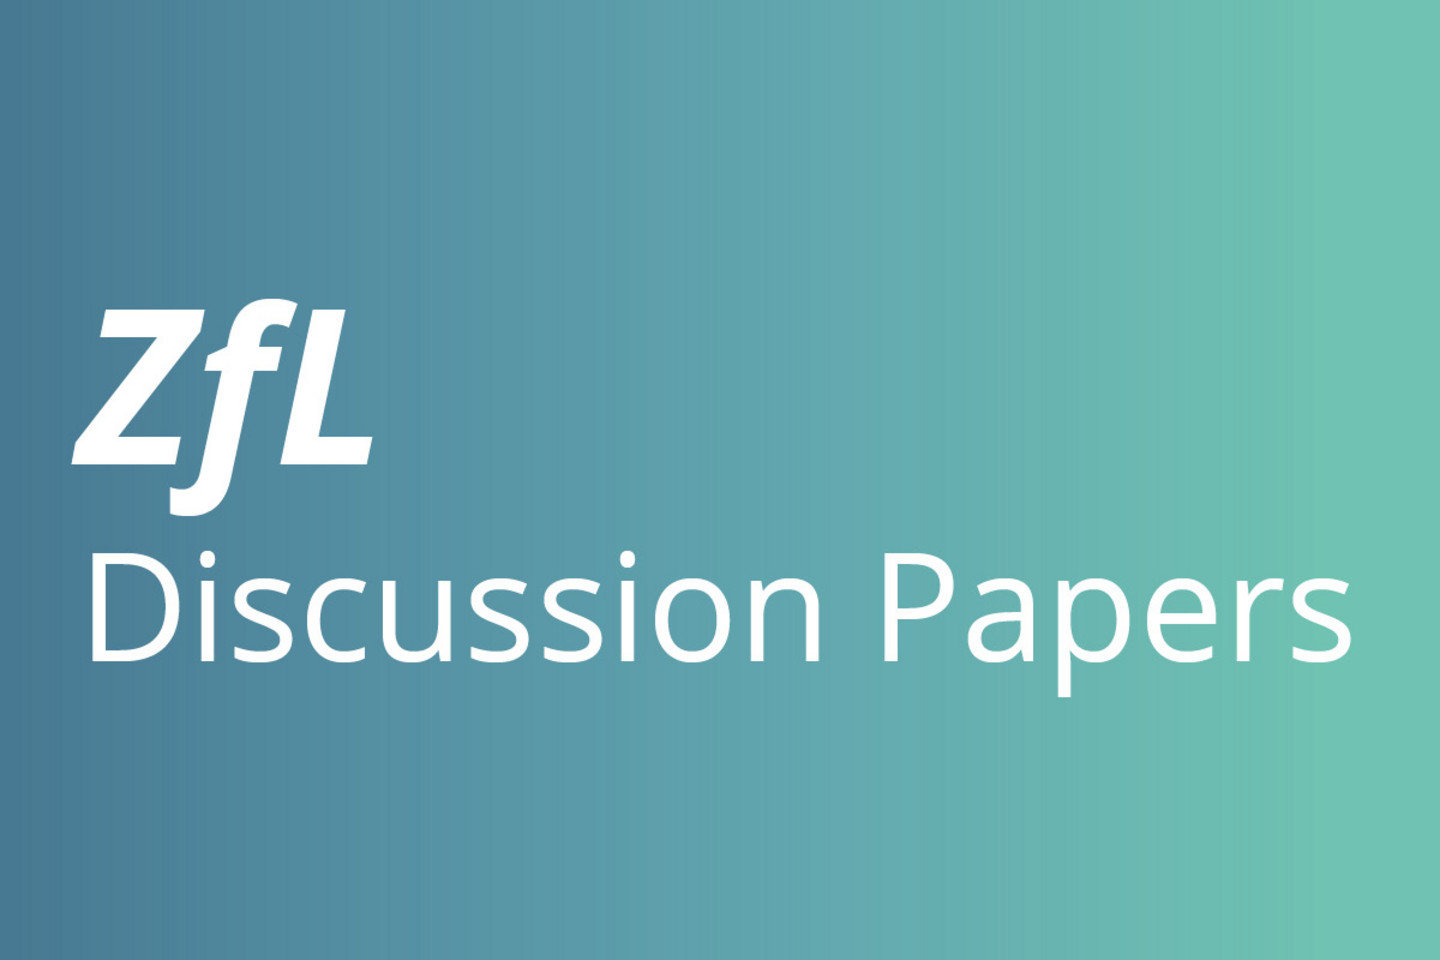 ZfL Discussion Papers